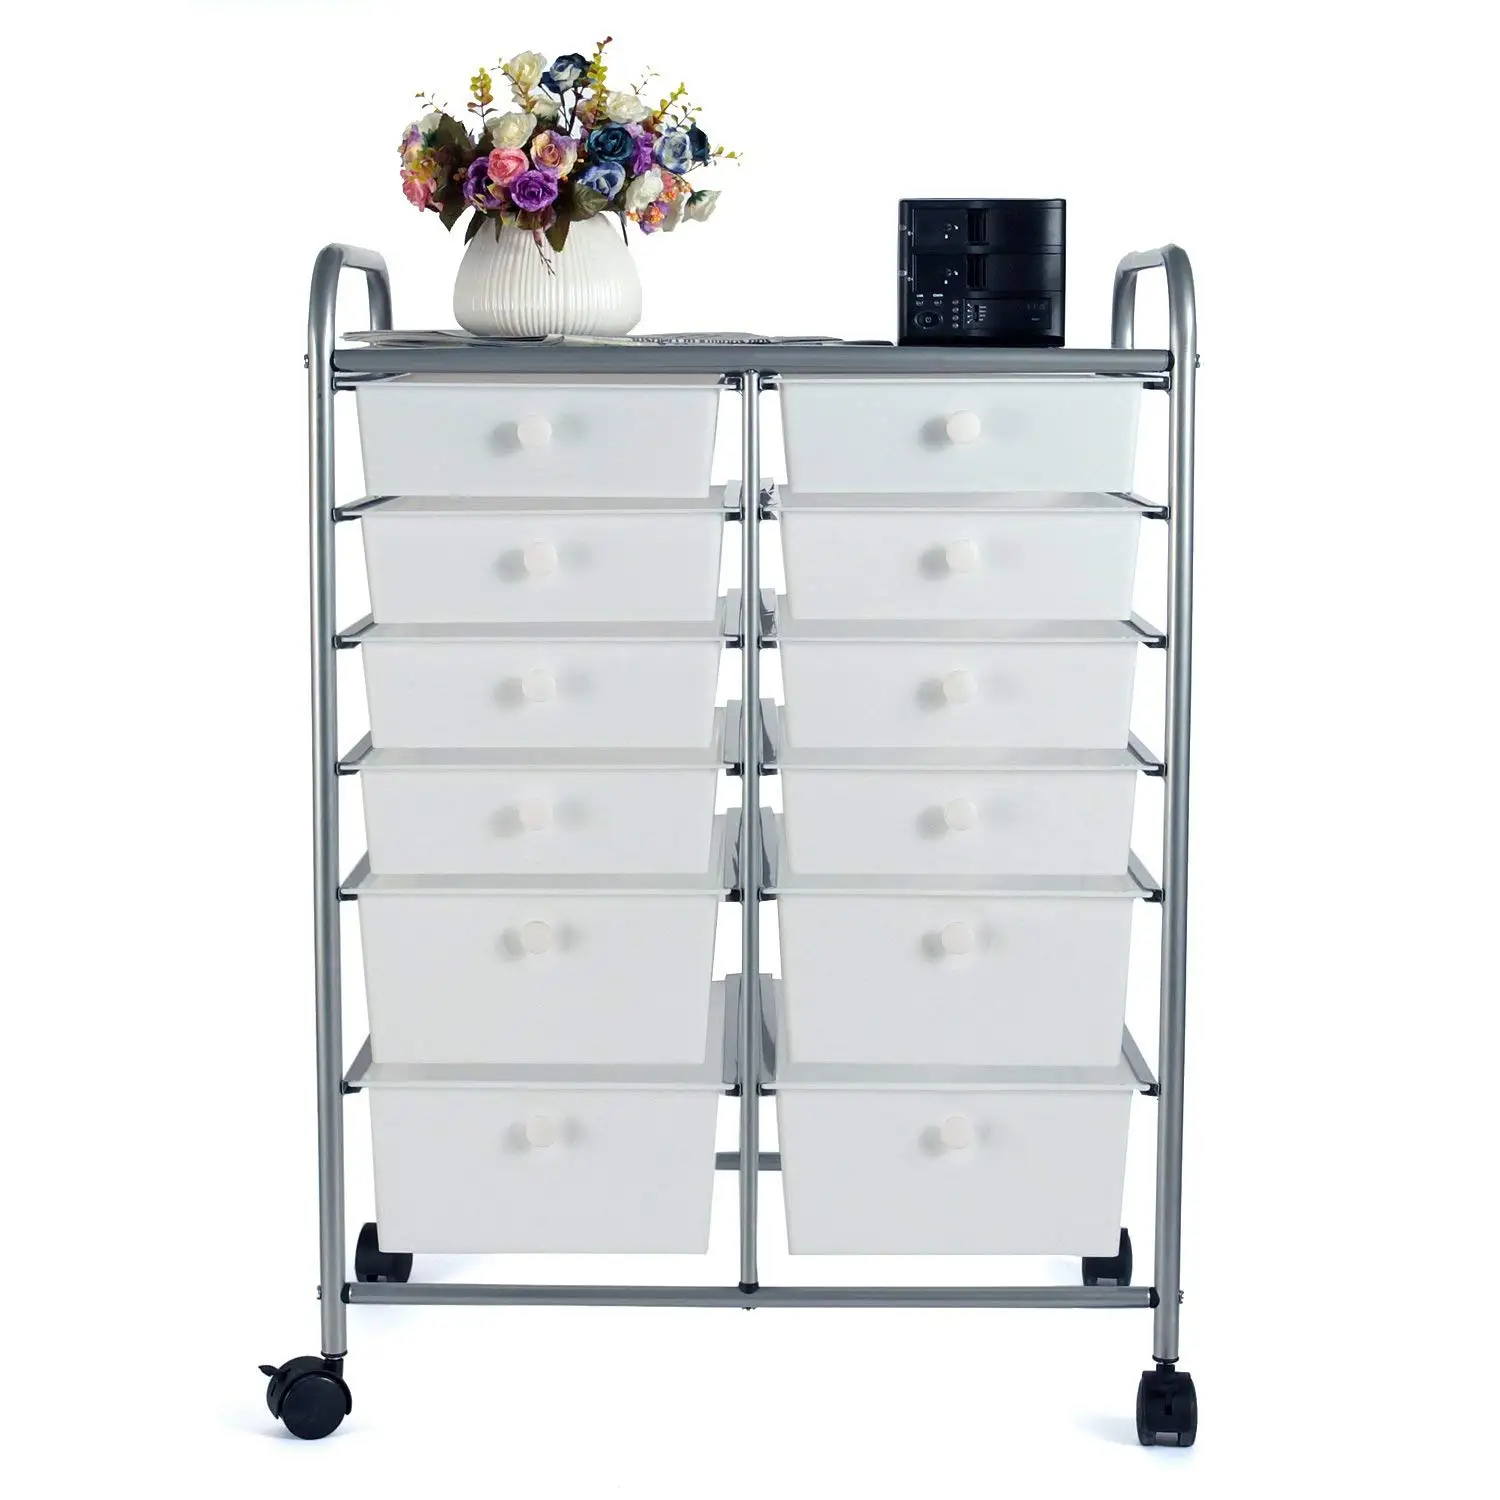 Zyoou 6-Layer Rolling Storage Cart with 12-Drawer Heavy Duty Chrome Steel Frame for Home Office Beauty Salon Storage White